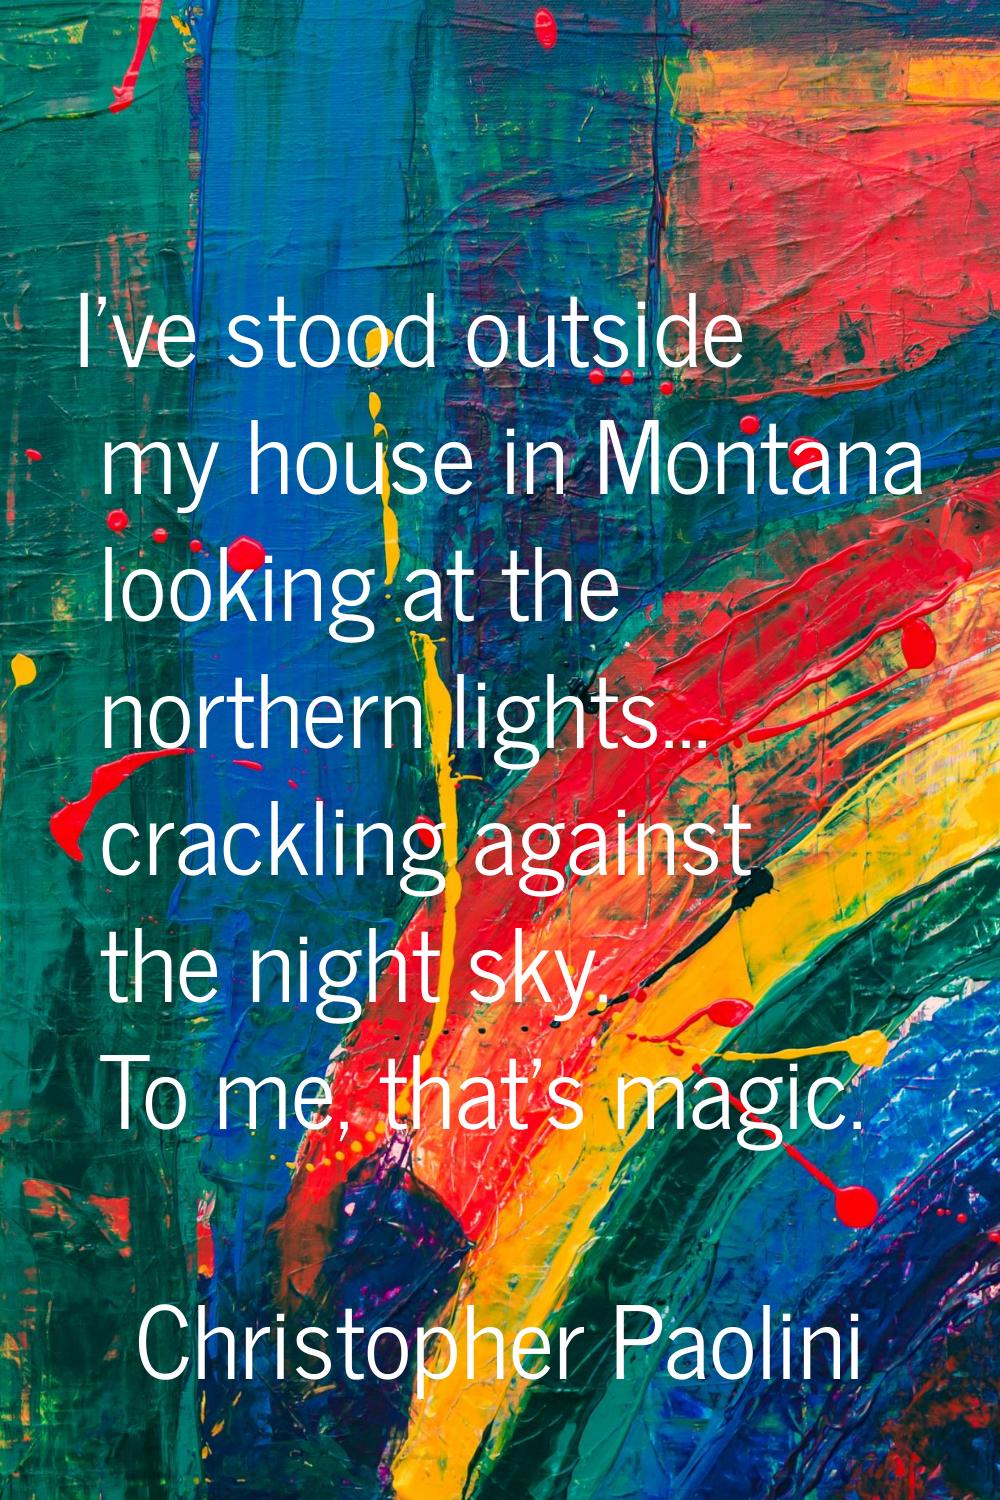 I've stood outside my house in Montana looking at the northern lights... crackling against the nigh